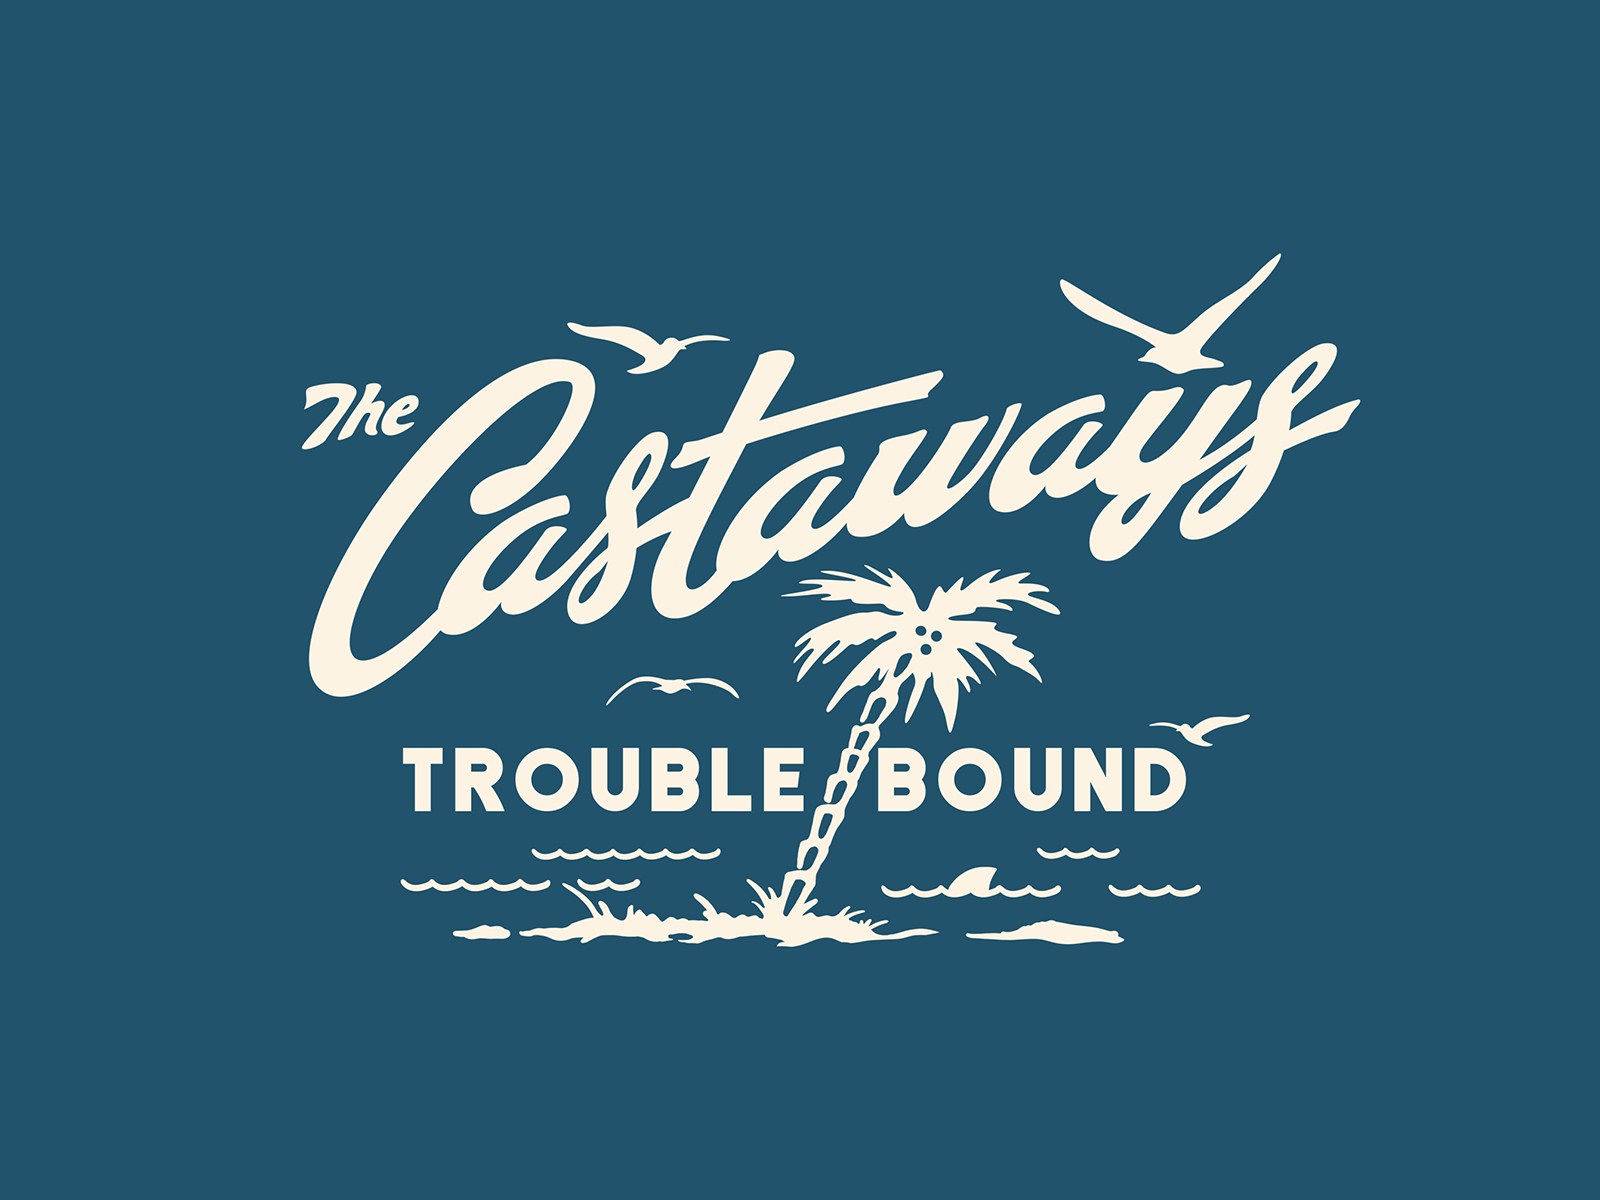 theCASTAWAYS by MonkeyBen for DEFPRO on Dribbble